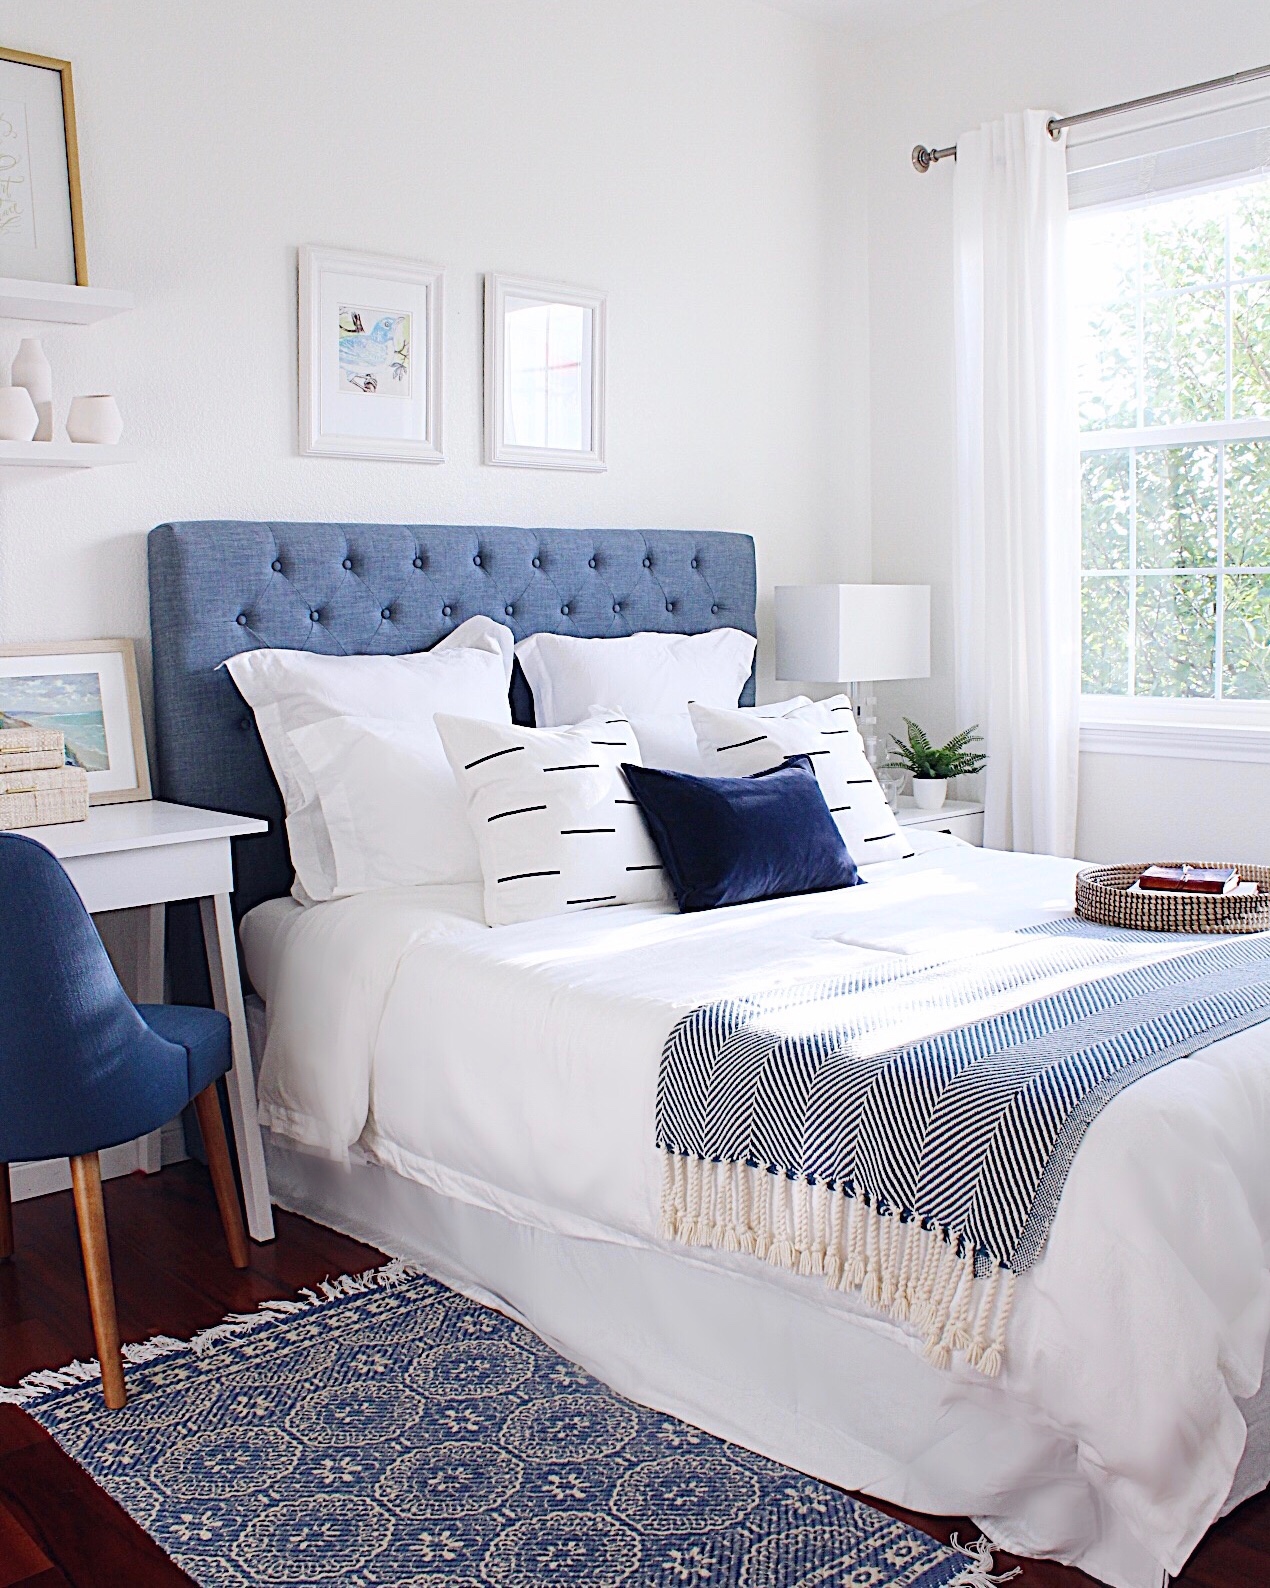 How to decorate with blue and white in a guest bedroom 